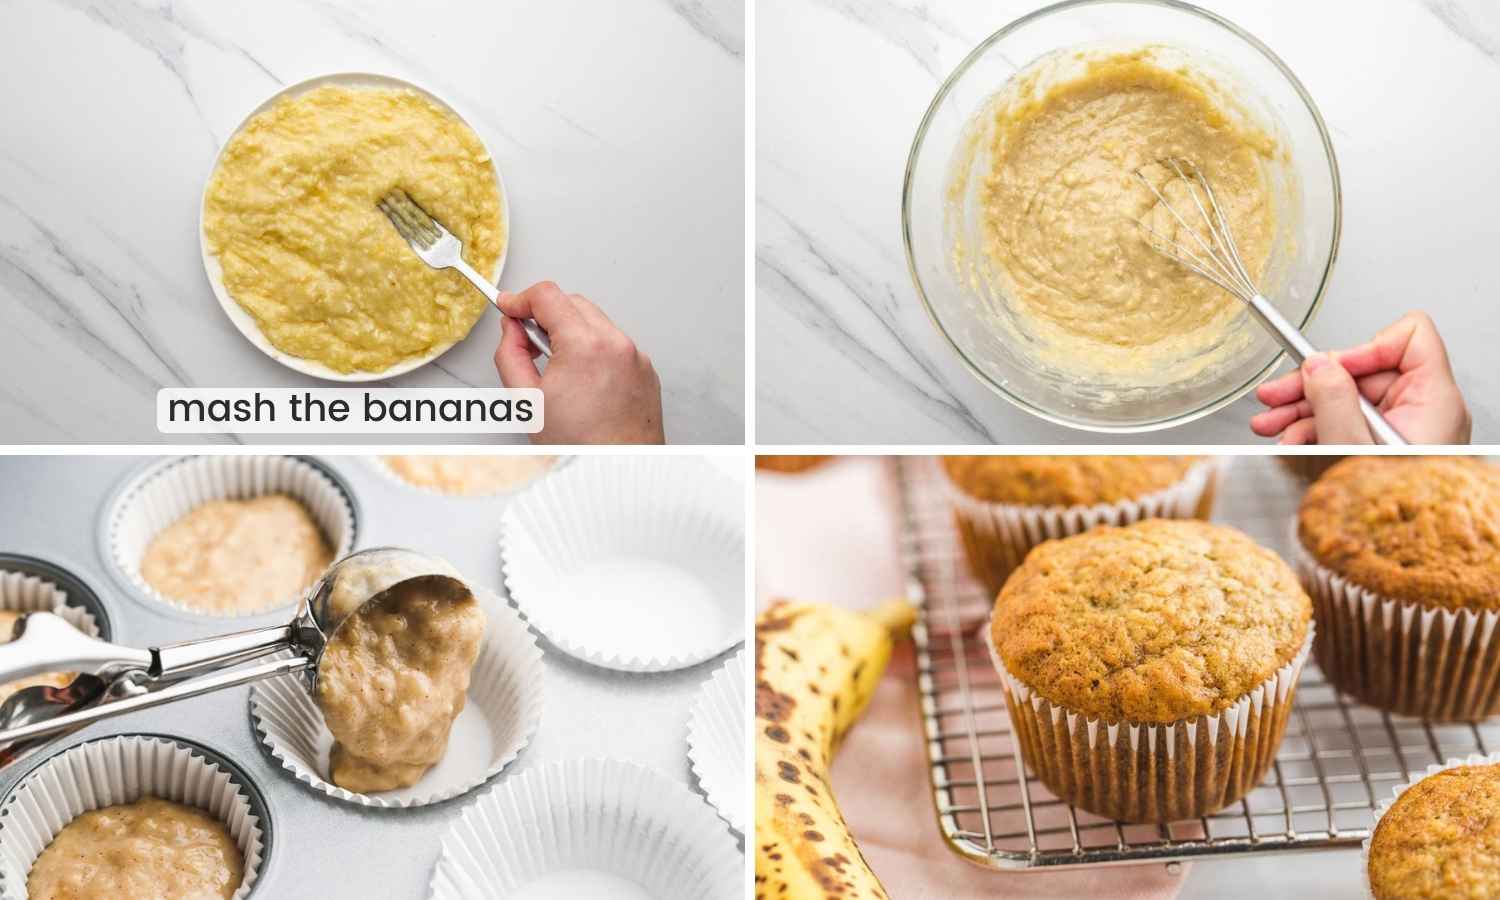 Collage of four images showing how to make banana muffins